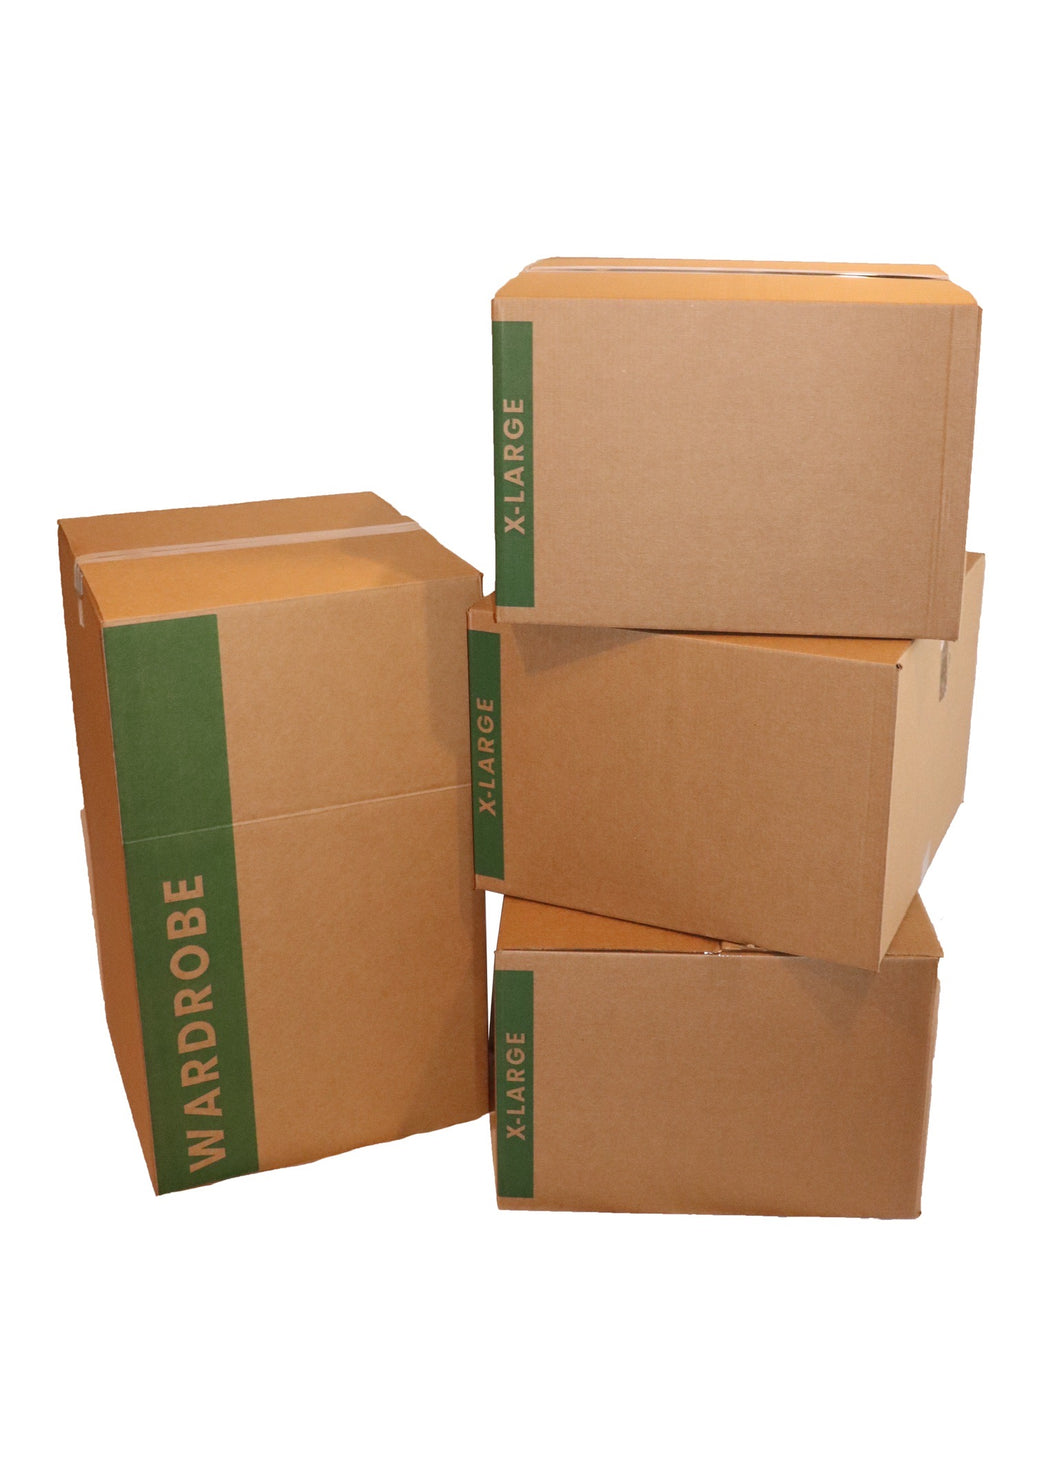 4 Boxes Starter Package